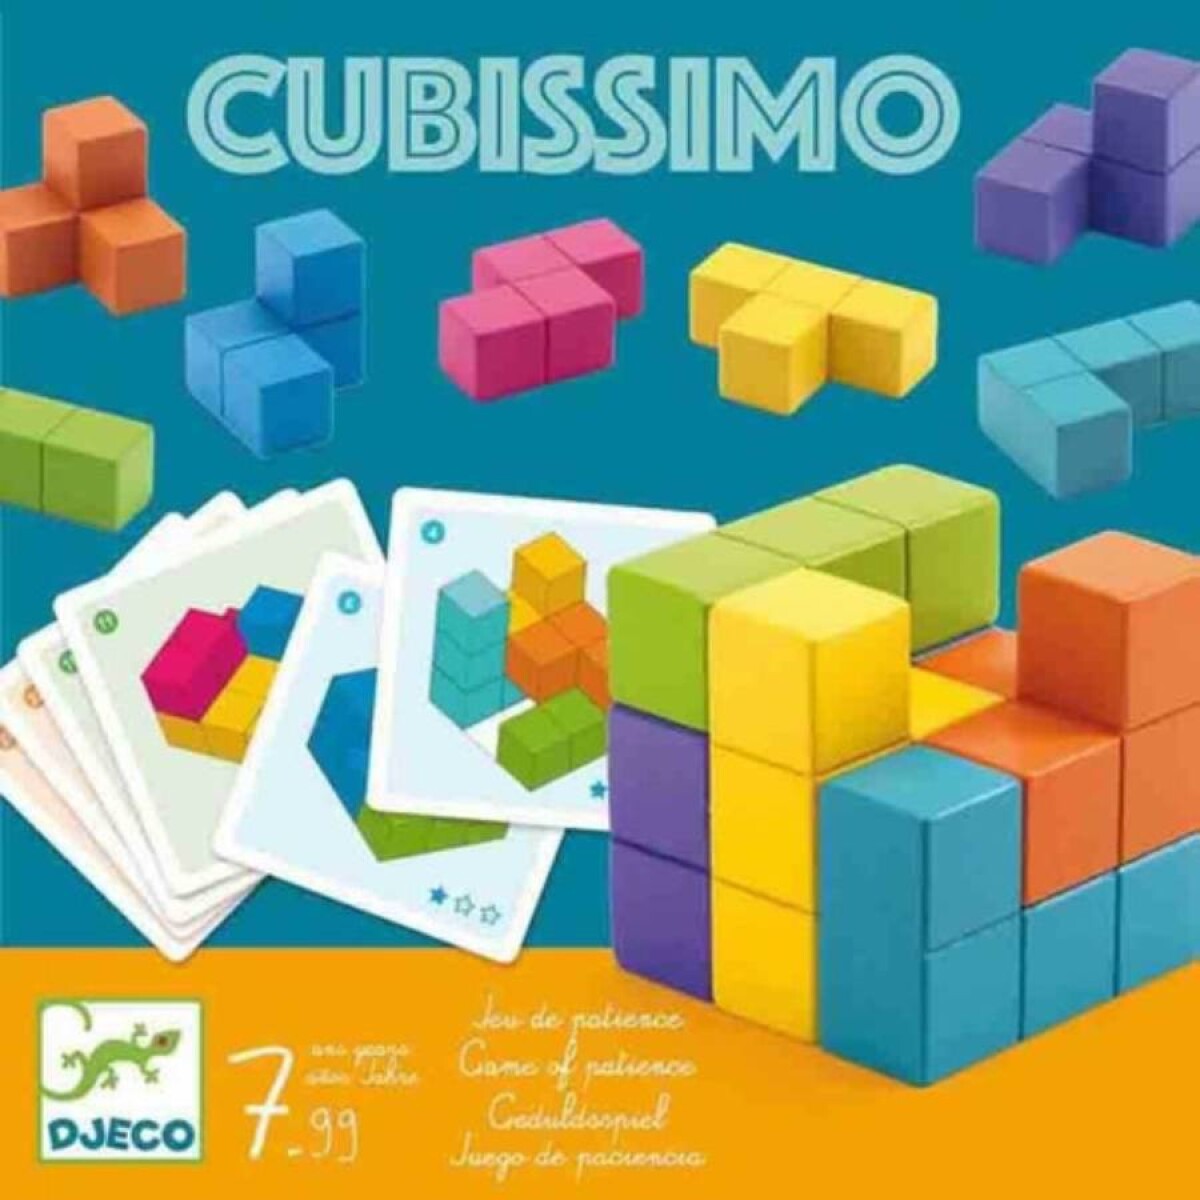 Cubissimo by Djeco 